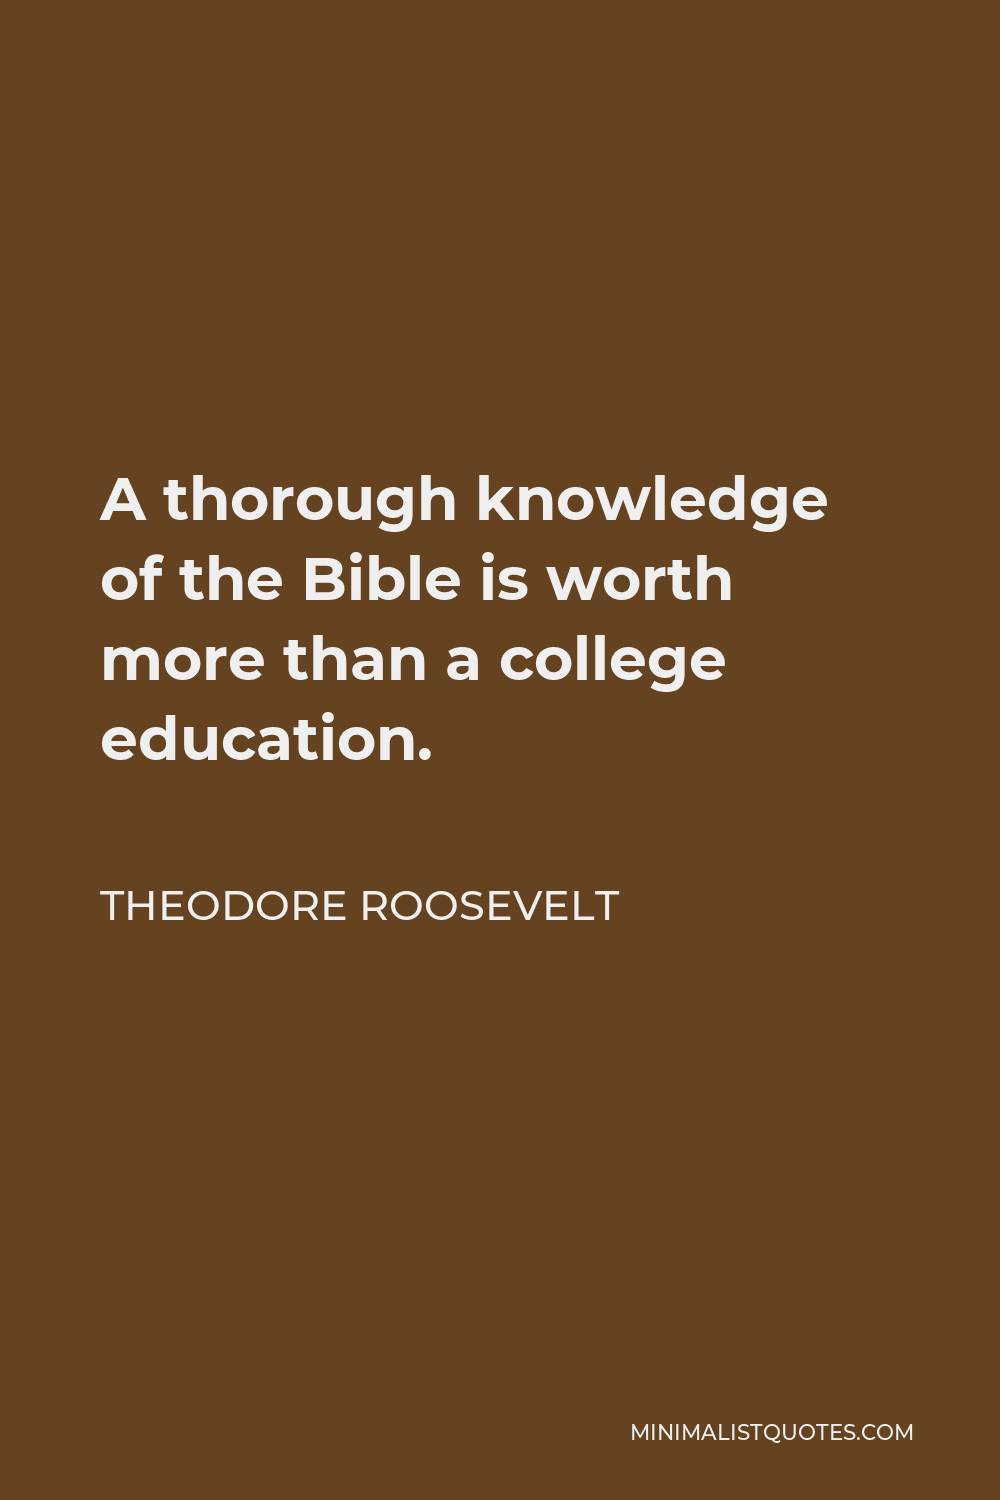 Theodore Roosevelt Quote - A thorough knowledge of the Bible is worth more than a college education.